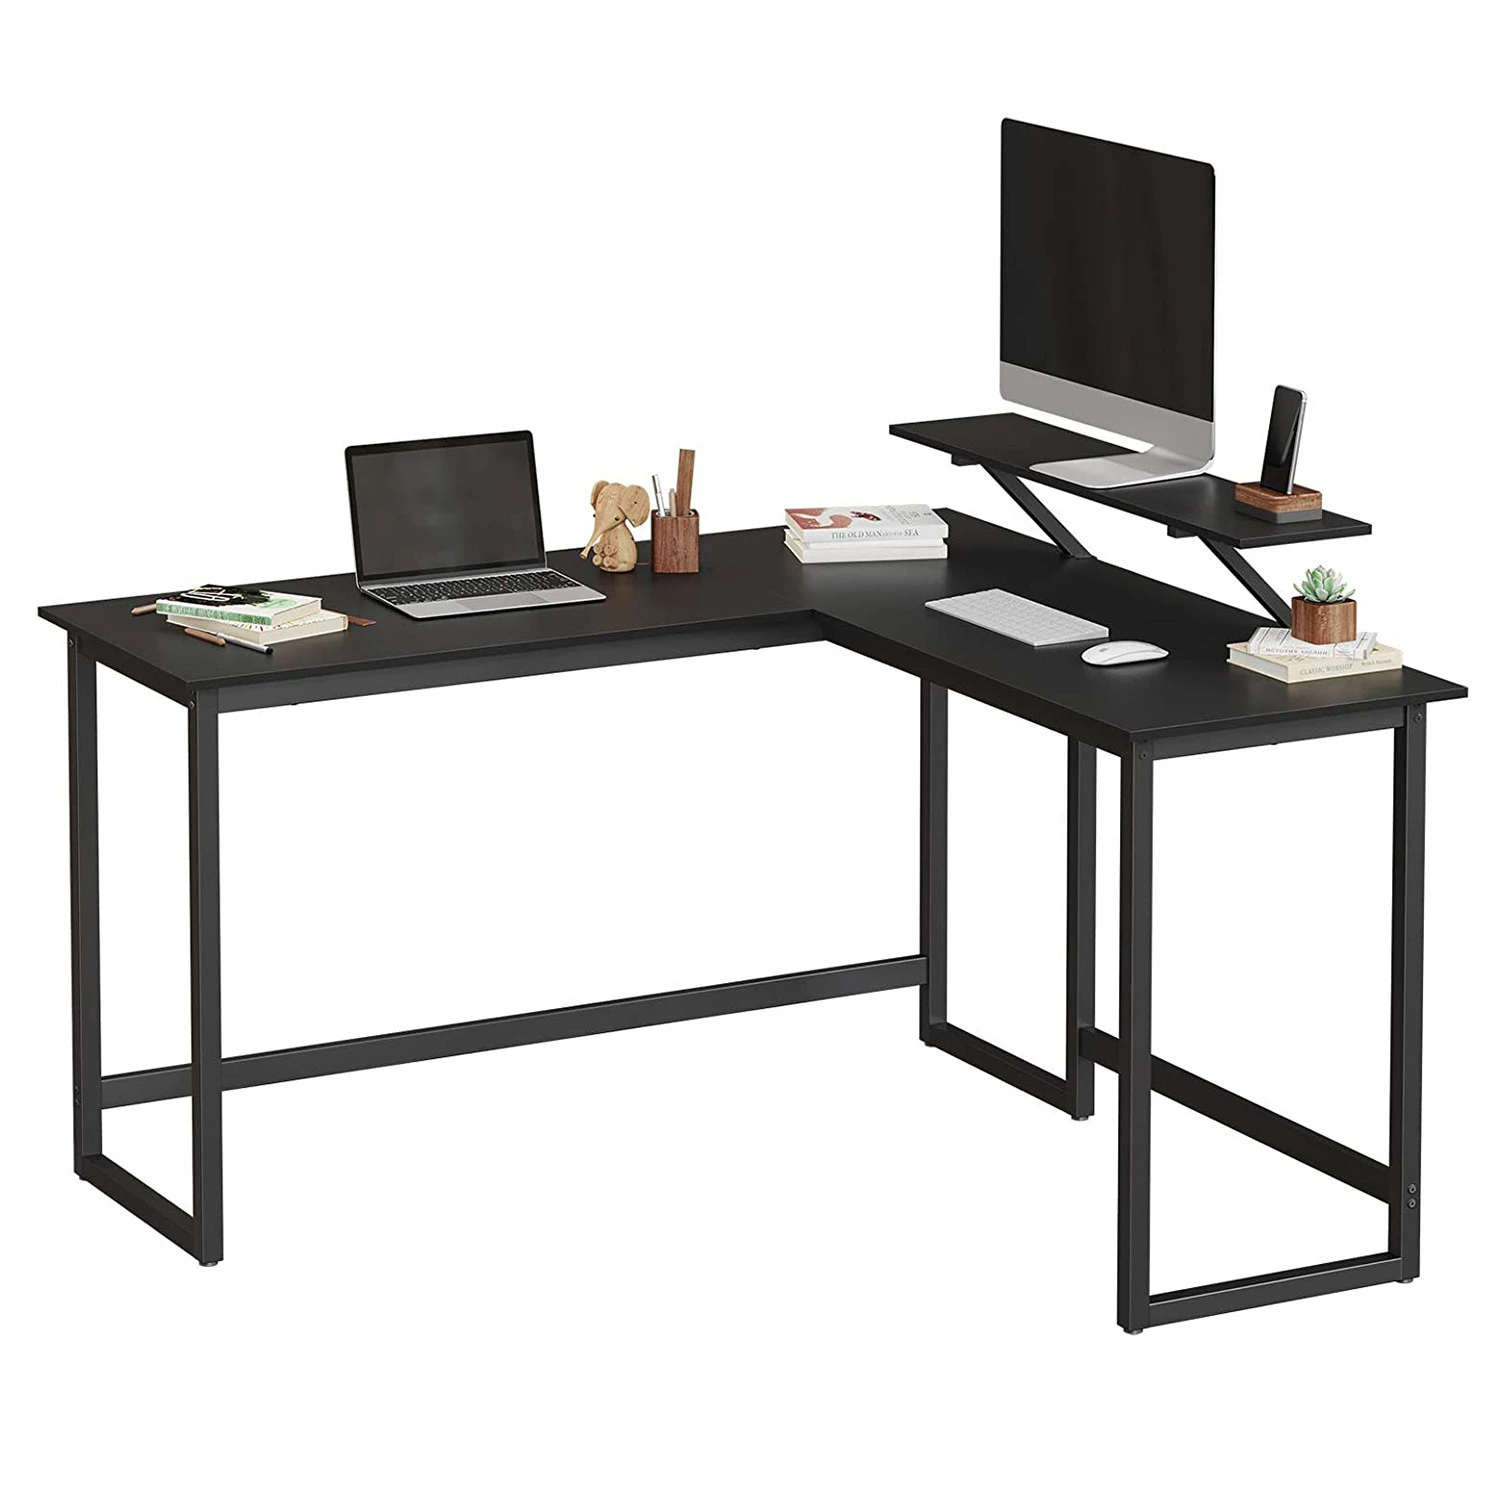 VASAGLE Space Saving Gaming Study Writing Desk Industrial Writing Workstation L-Shaped Corner Computer Desk with Monitors Stand